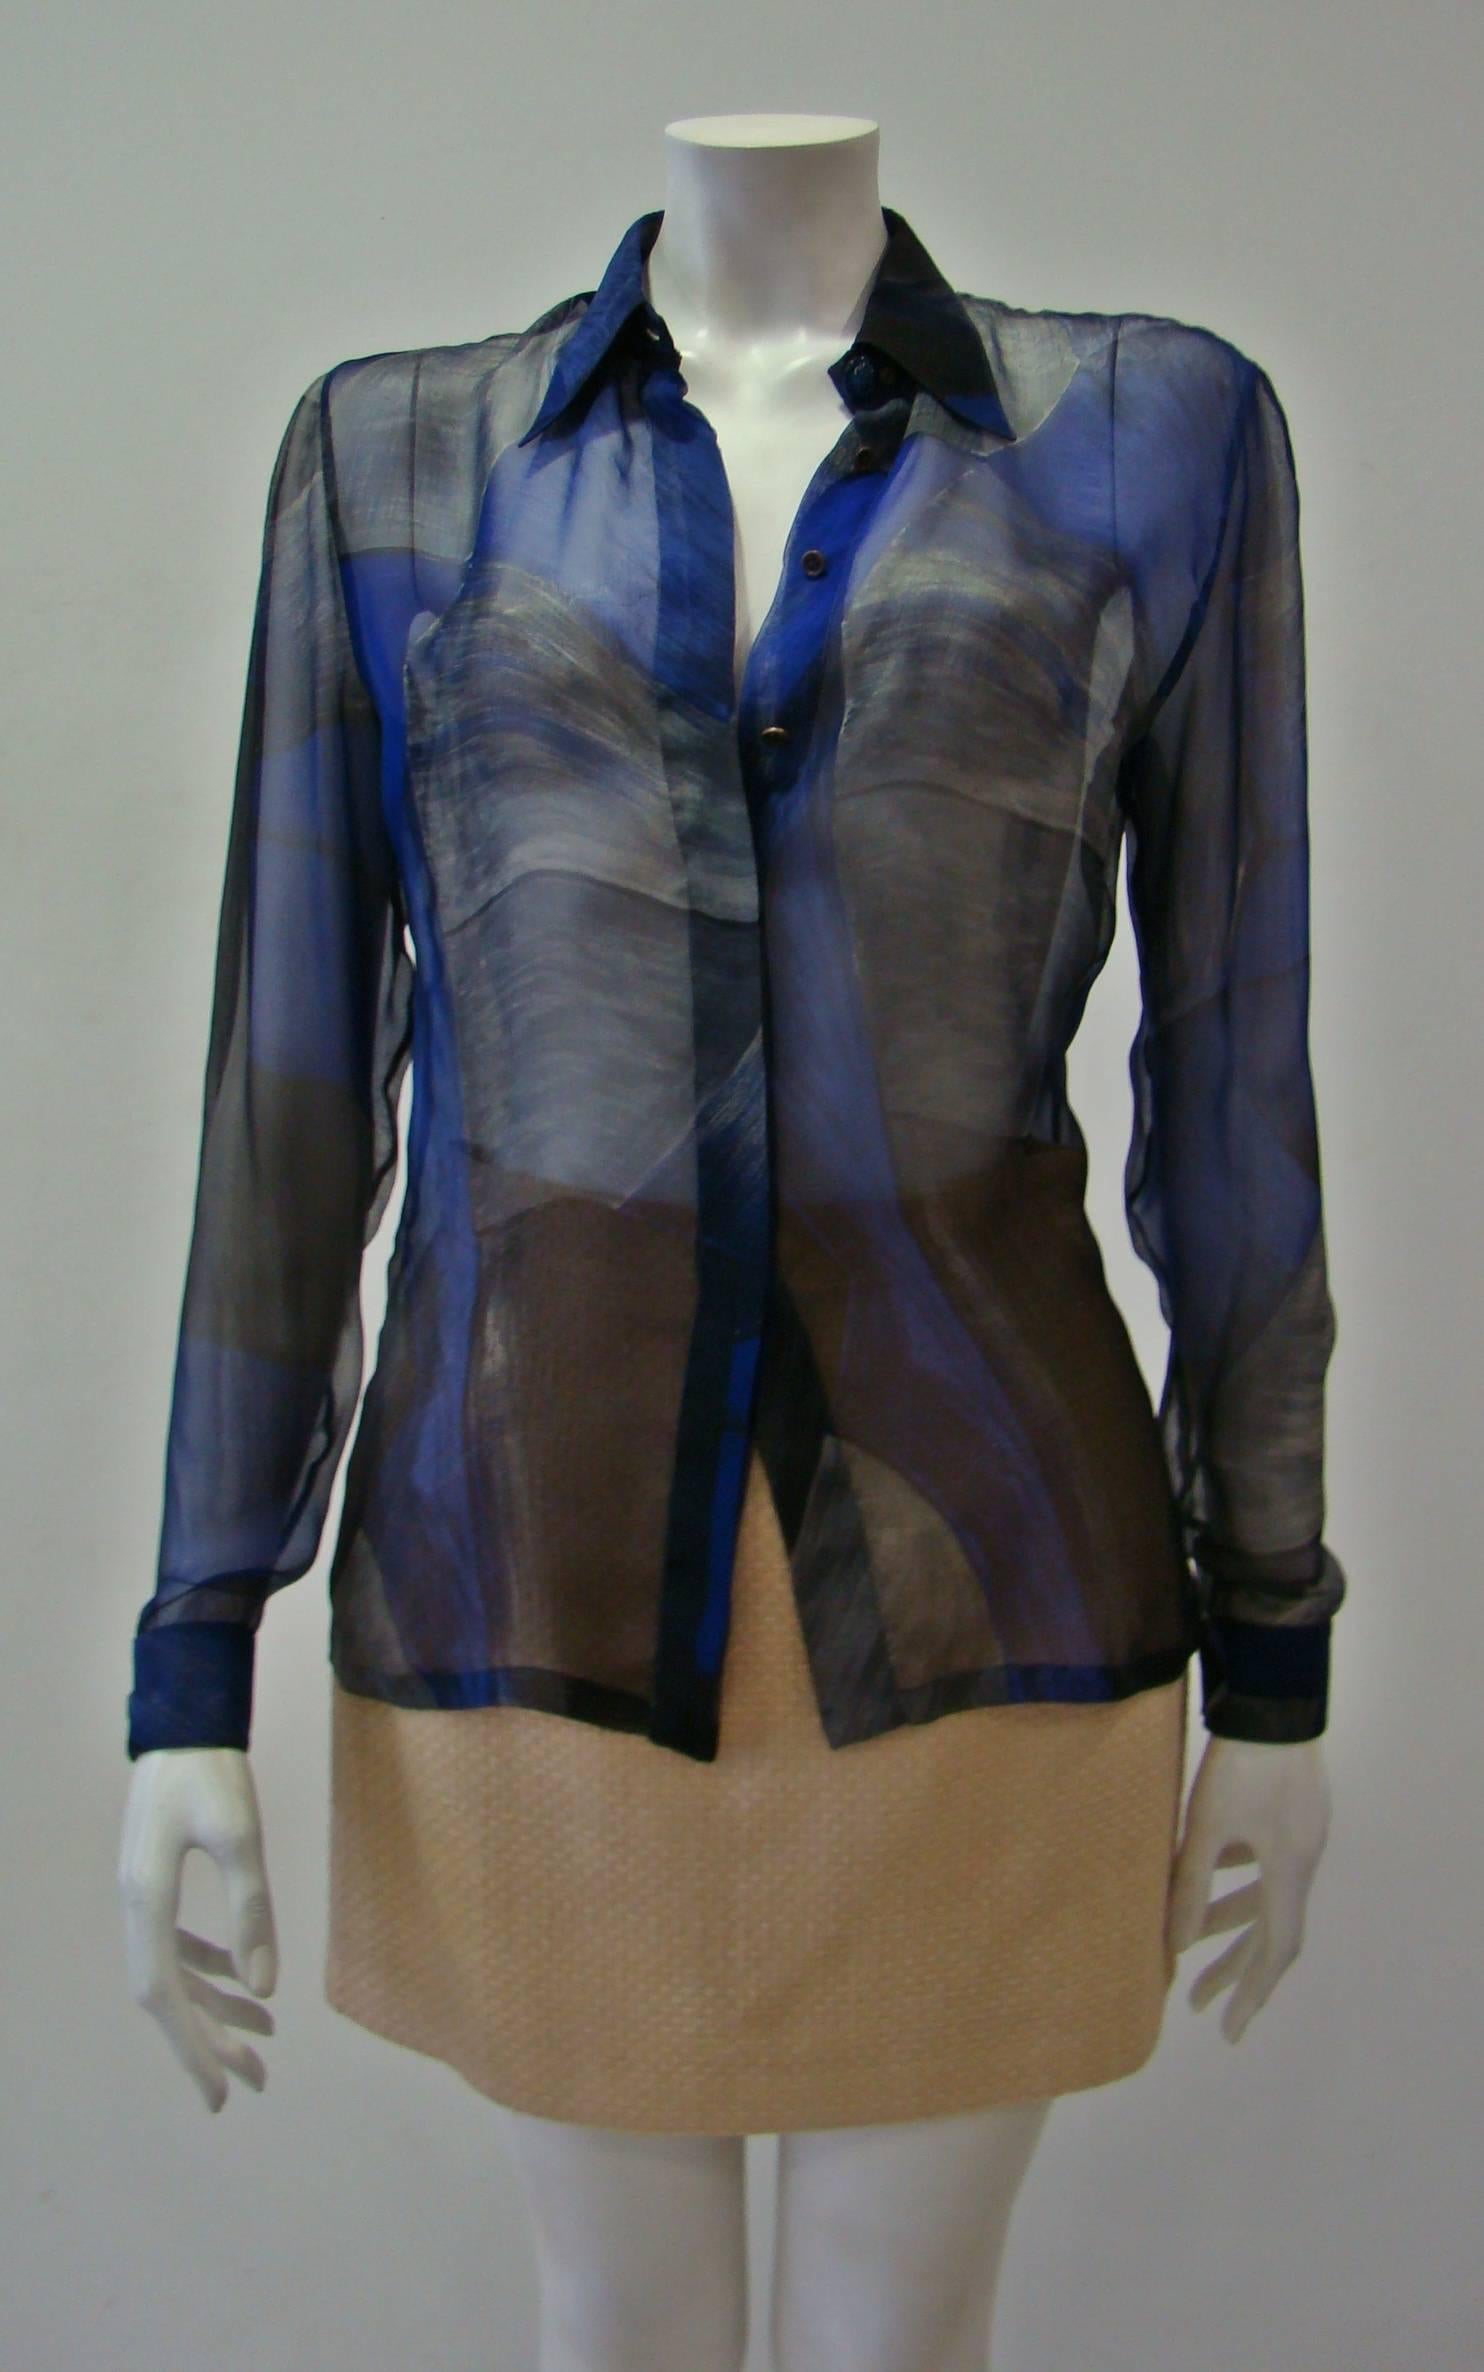 Rare Gianni Versace Couture Sheer Printed Shirt. 100% Silk Featuring A Normal Collar With Medusa Buttons In The Collar And Sleeves. The Shirt Has An Invisible Small Hole On The Left Arm.